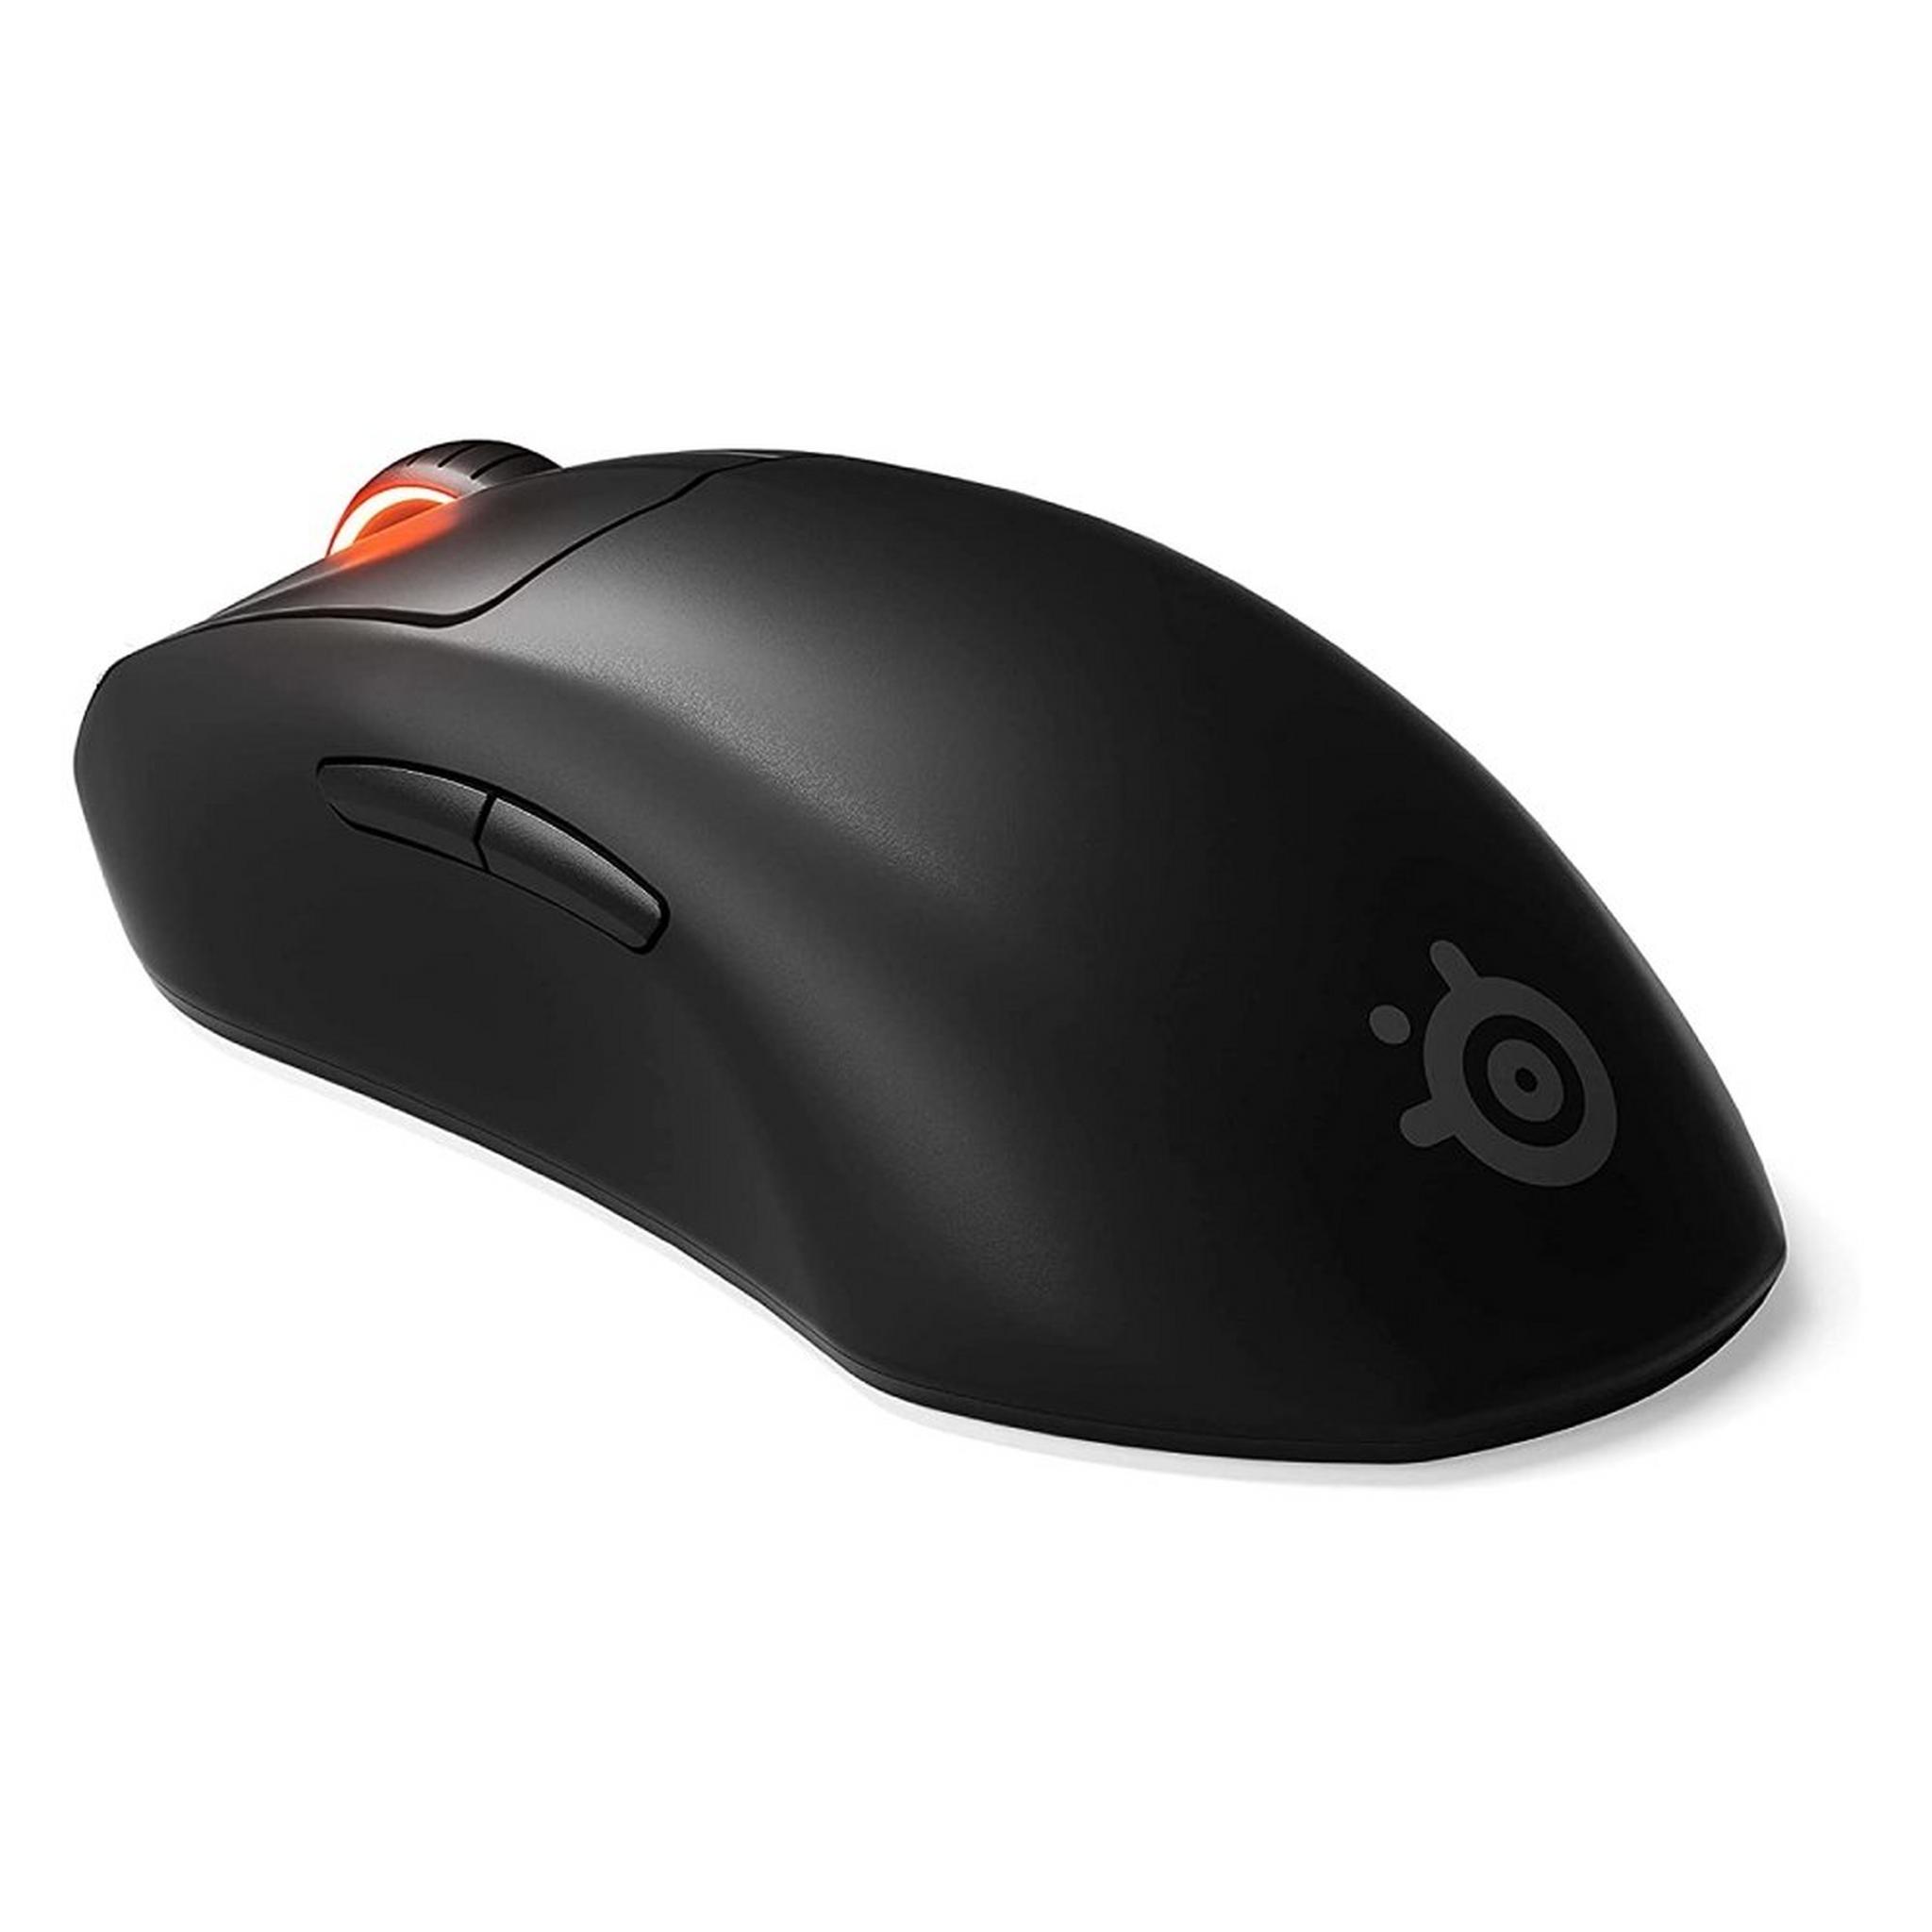 Steelseries Prime Wireless Gaming Mouse